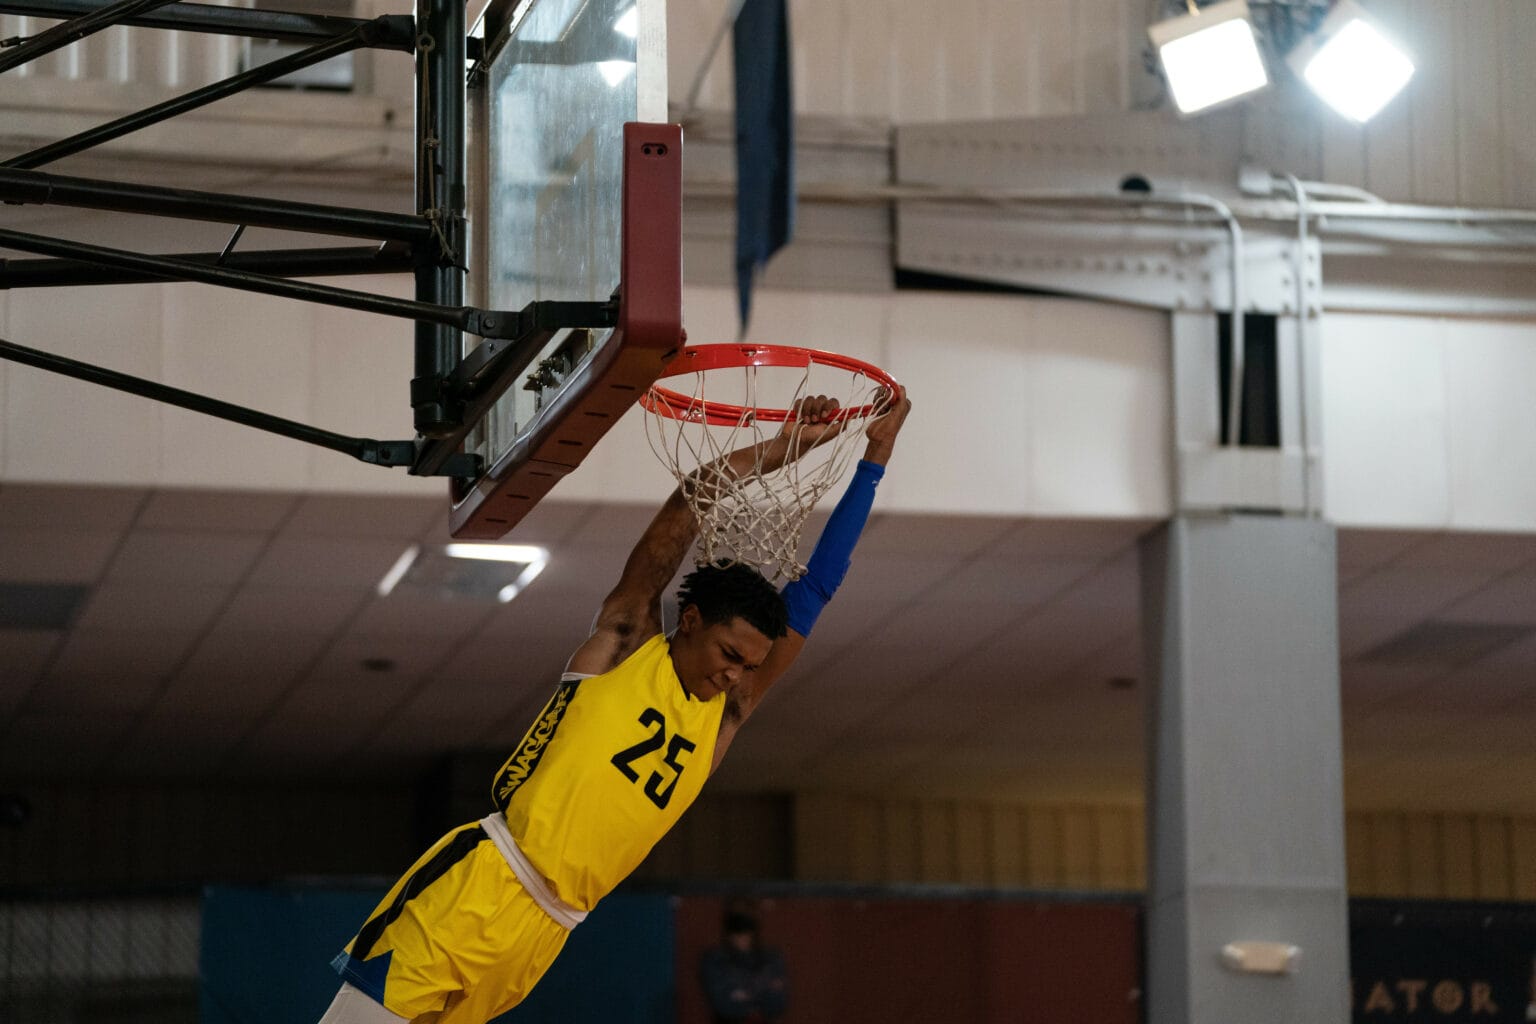 Swagger recap: Jace (played by Isaiah Hill) flies high as his team faces challenges.